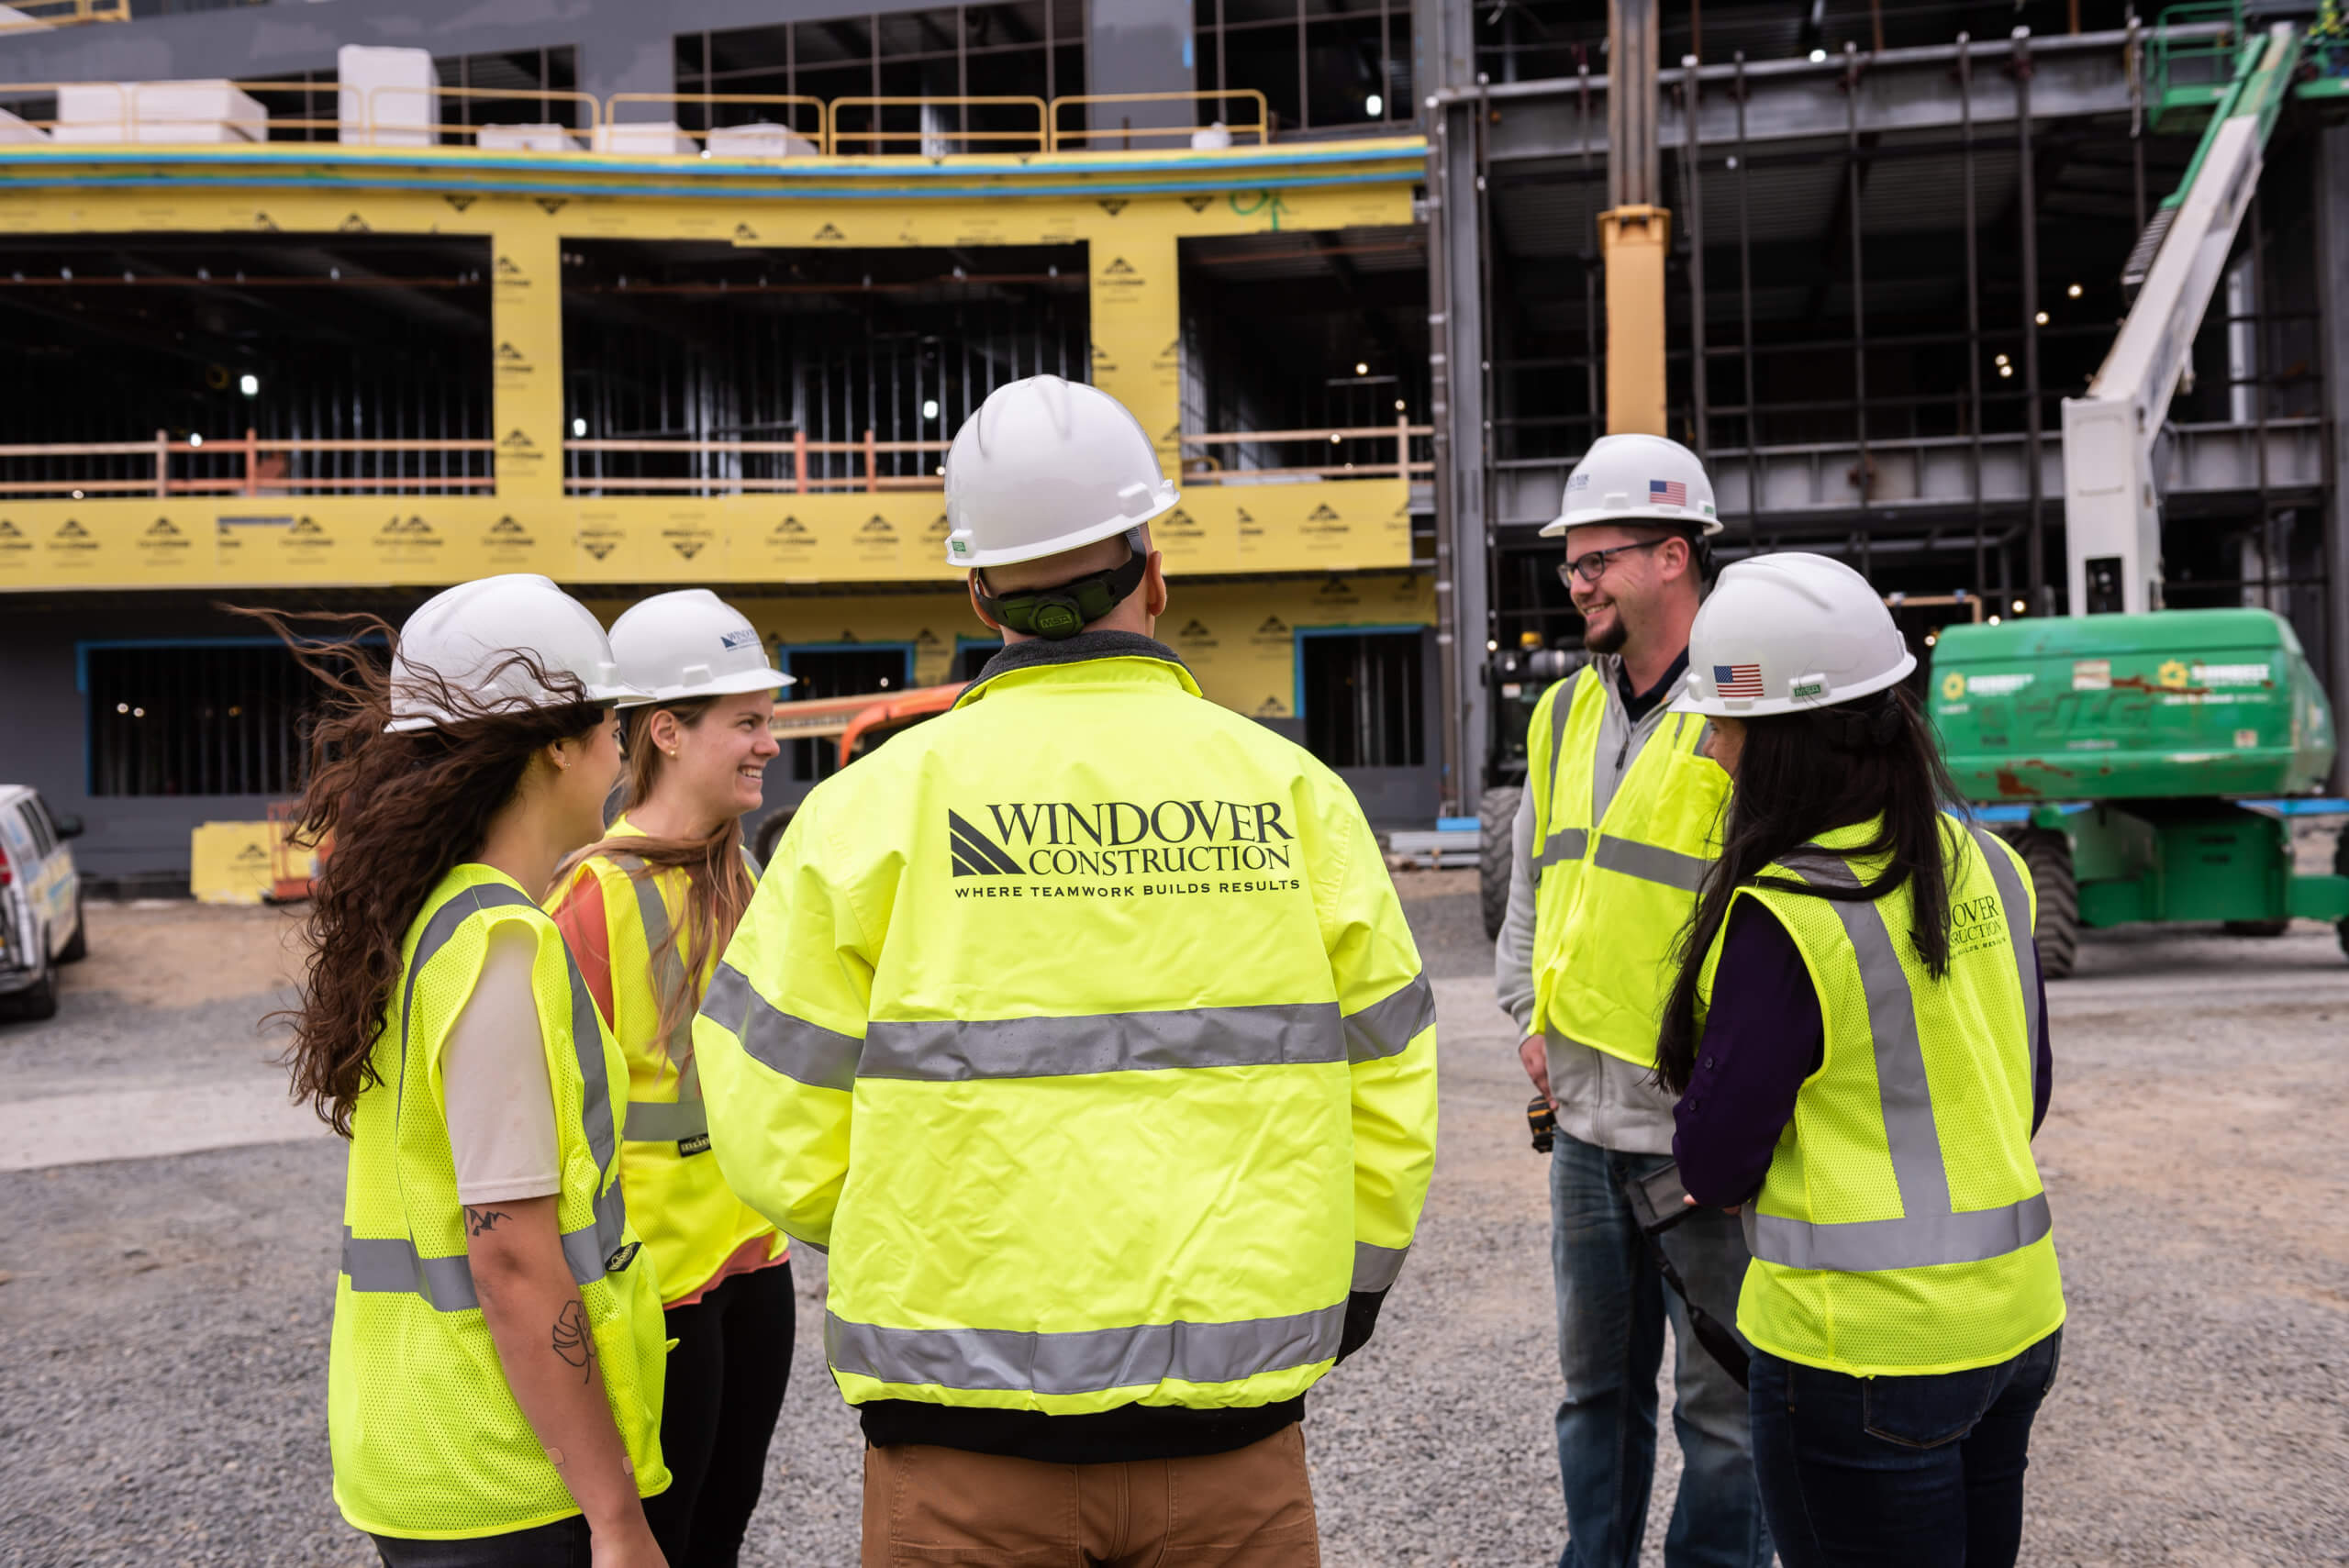 Construction site with people in a circle wearing Windover hard hats and vests